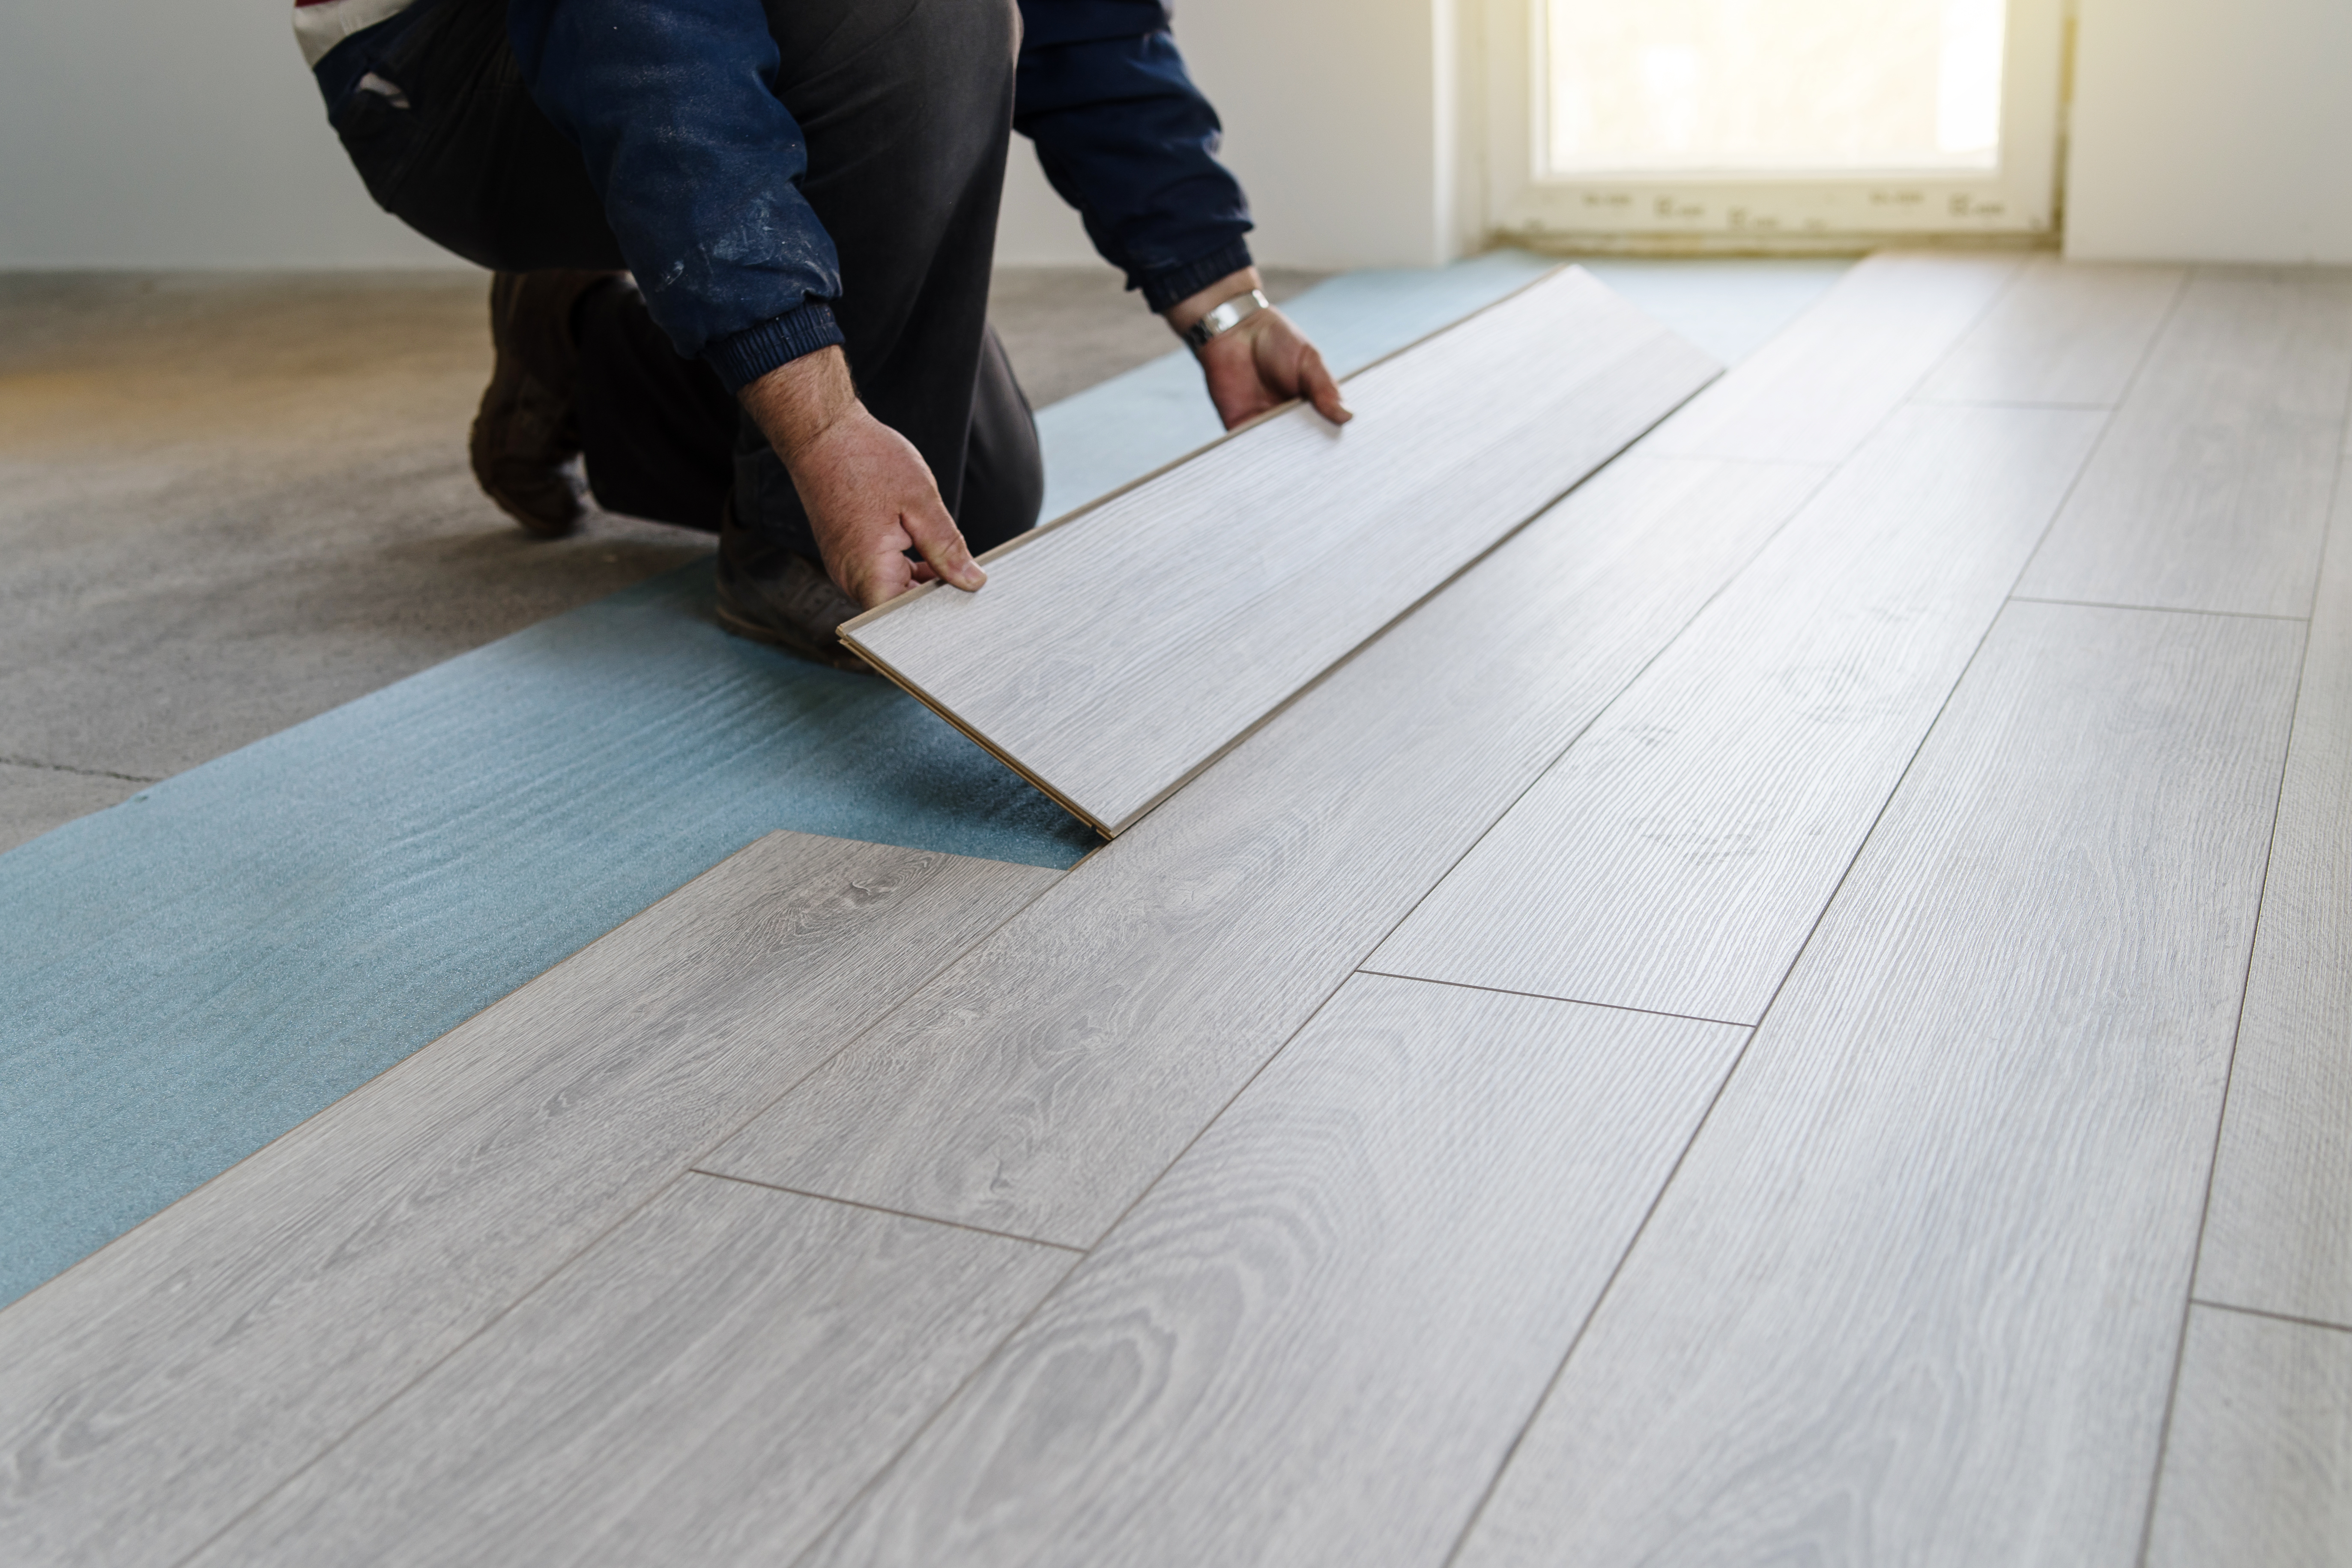 How to Replace Carpet With Laminate Flooring | Hunker